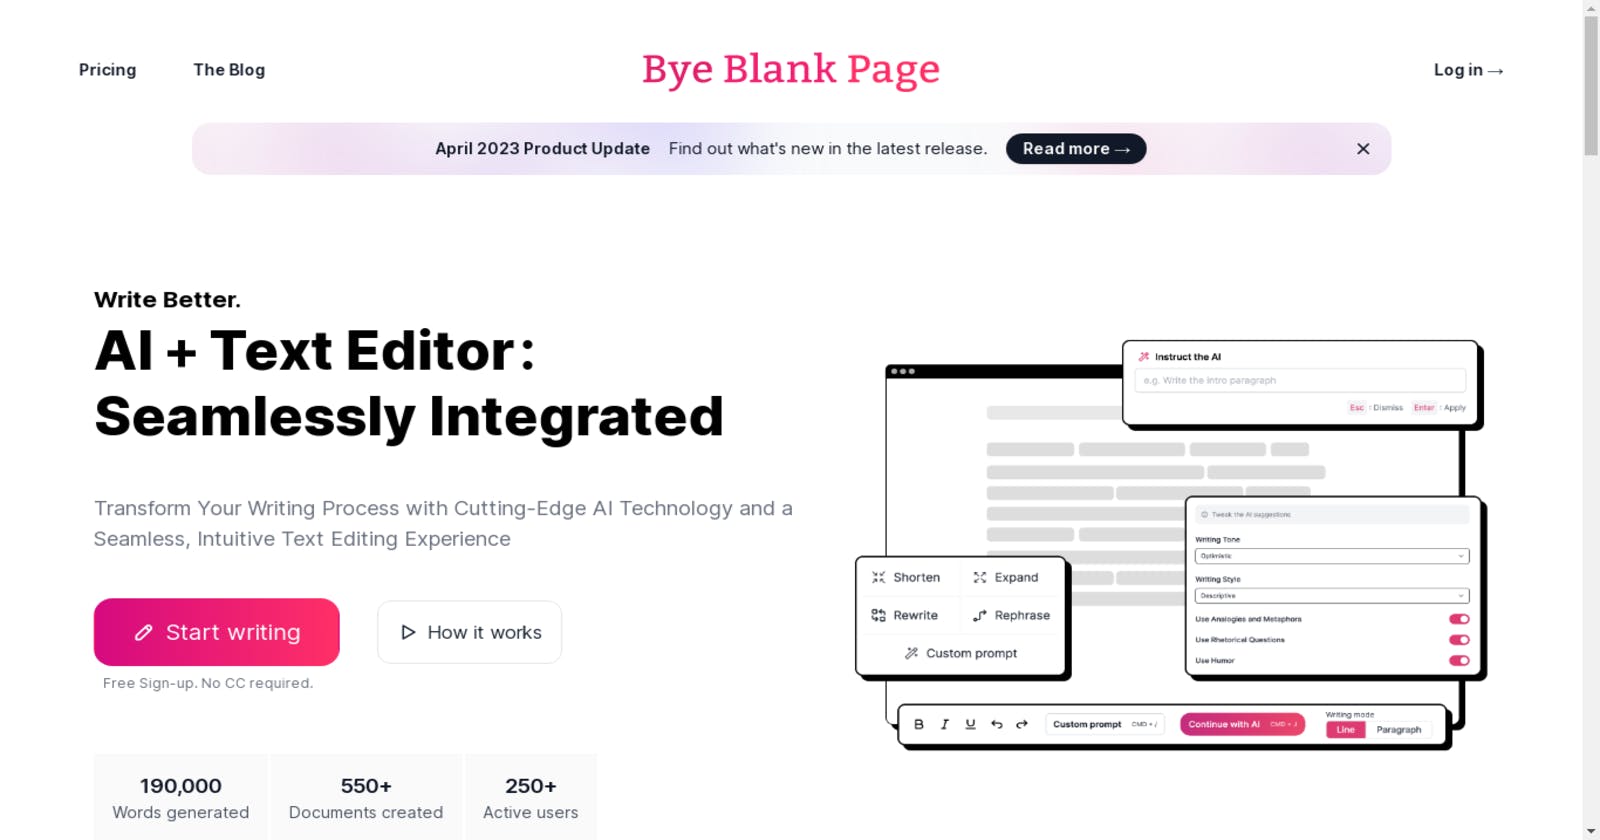 Bye Blank Page: Empower Your Writing with AI for Effortless Content Creation